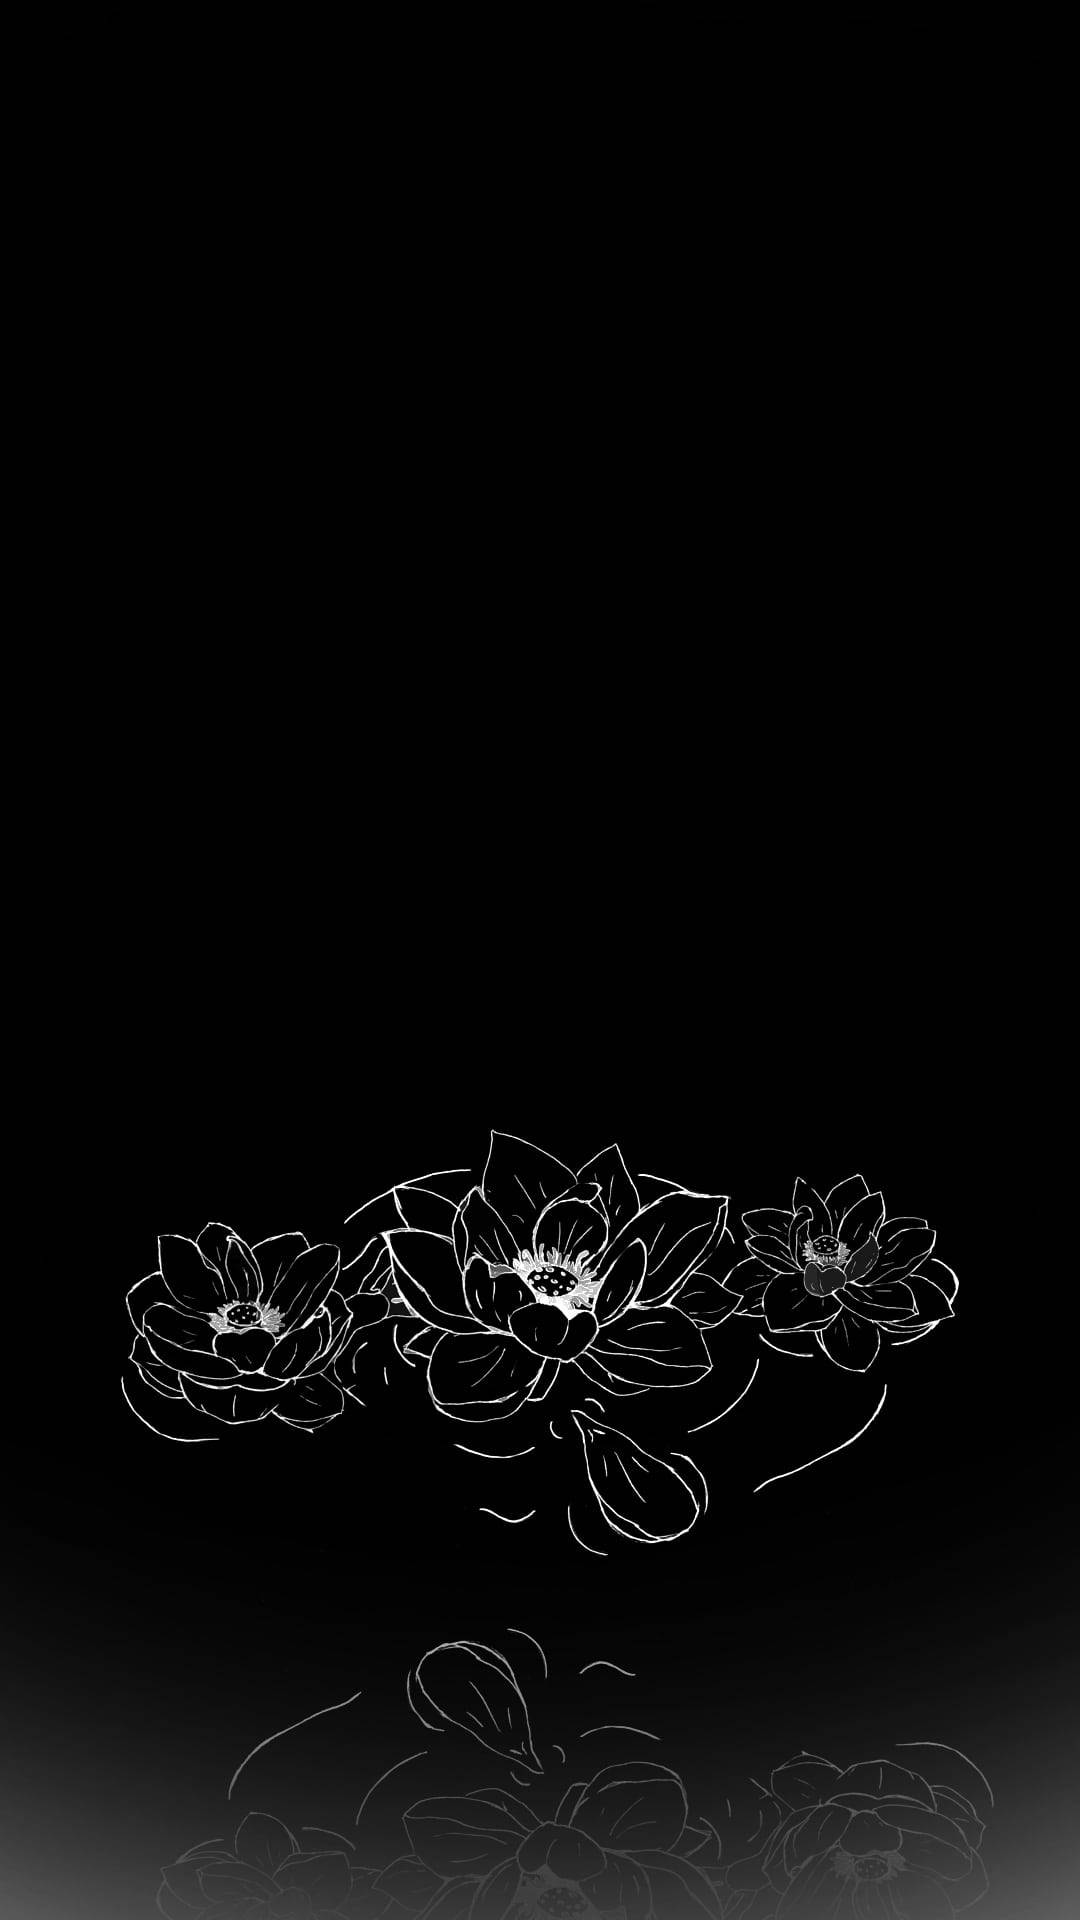 Caption: Majestic Trio Of Black And White Flowers Background